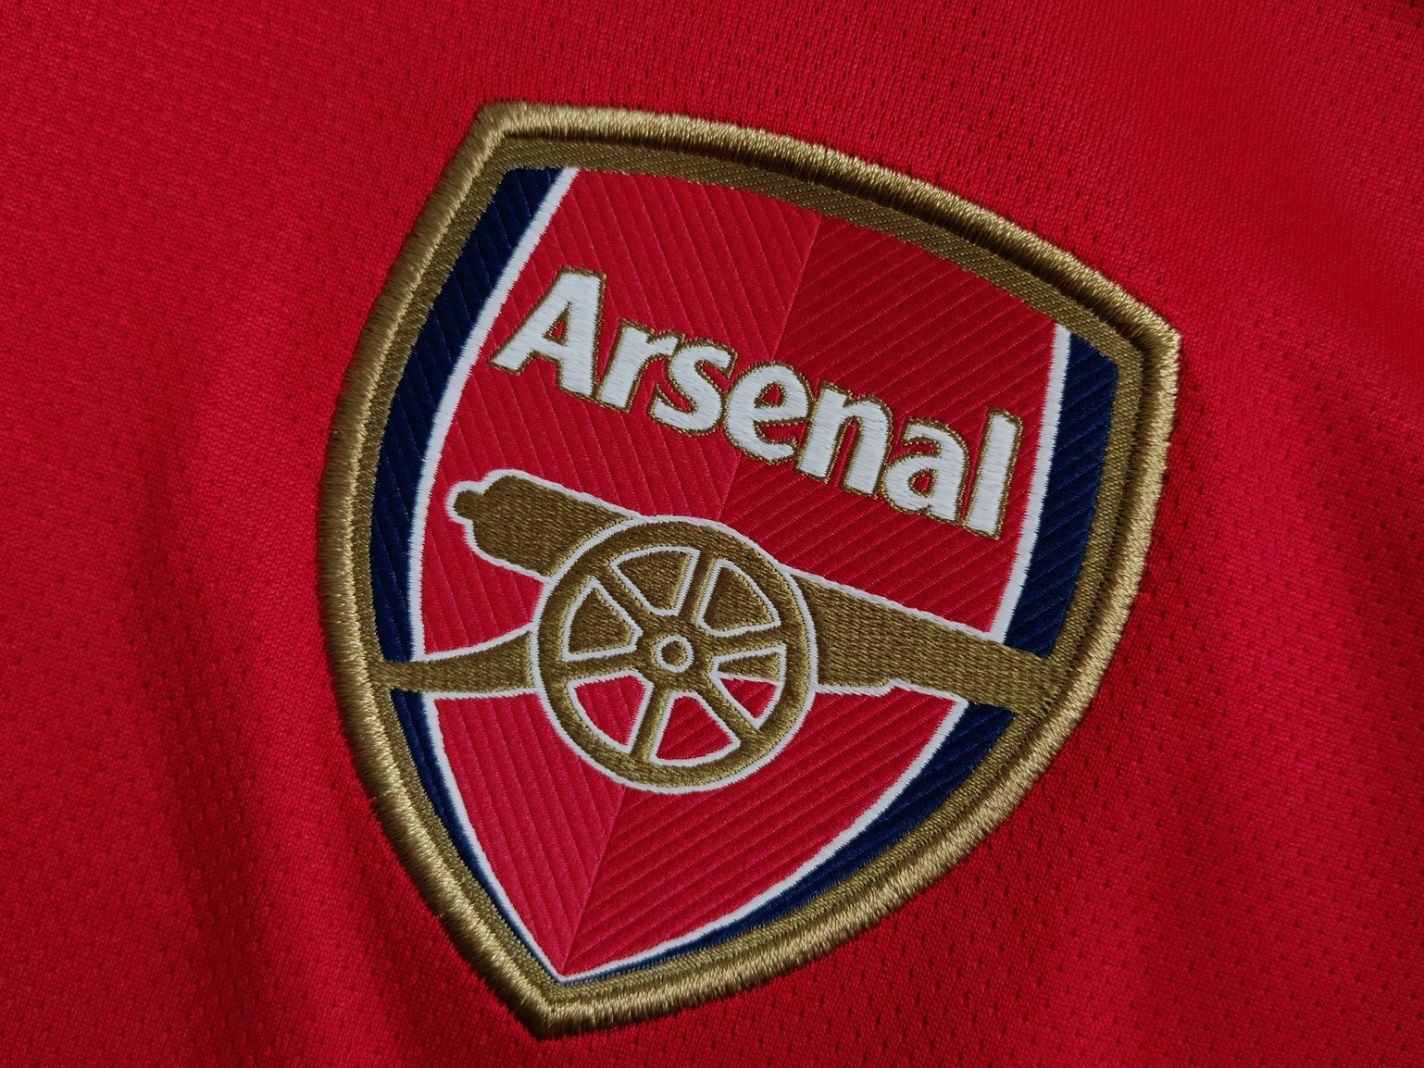 Arsenal home kit for 22/23 season leaks online with mixed reaction on collar